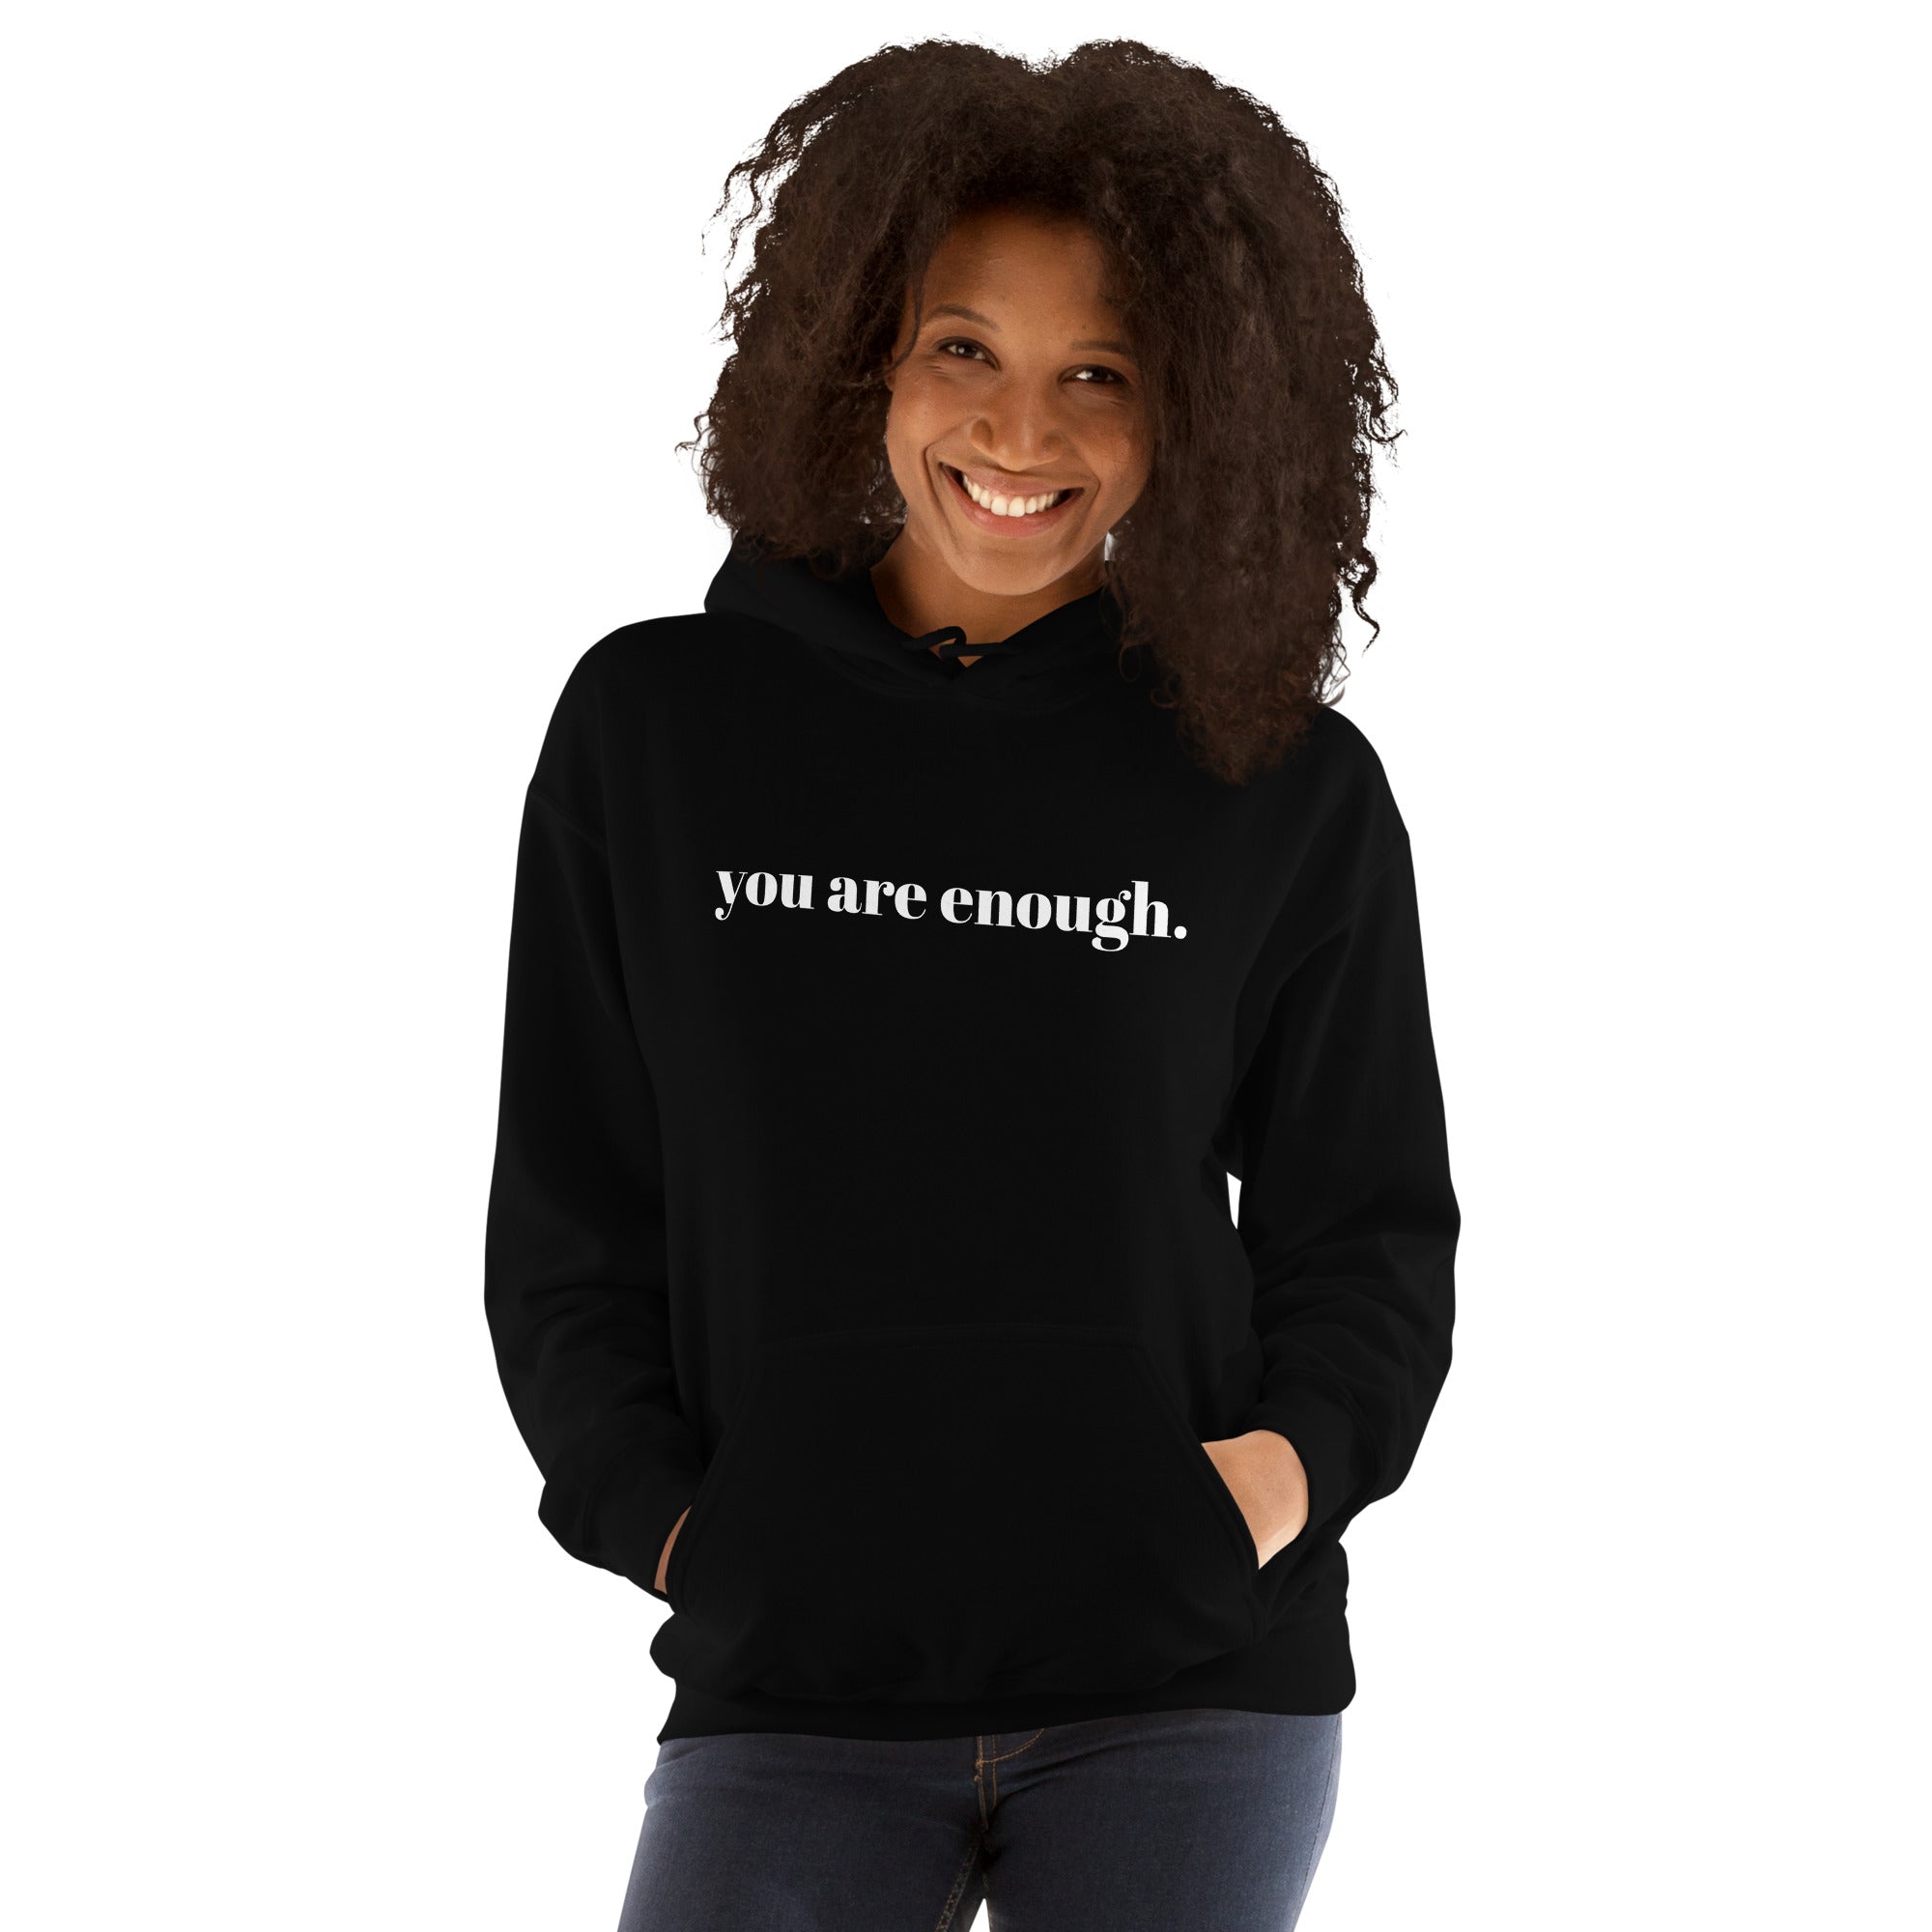 you are enough. hoodie - Rustic Design CO